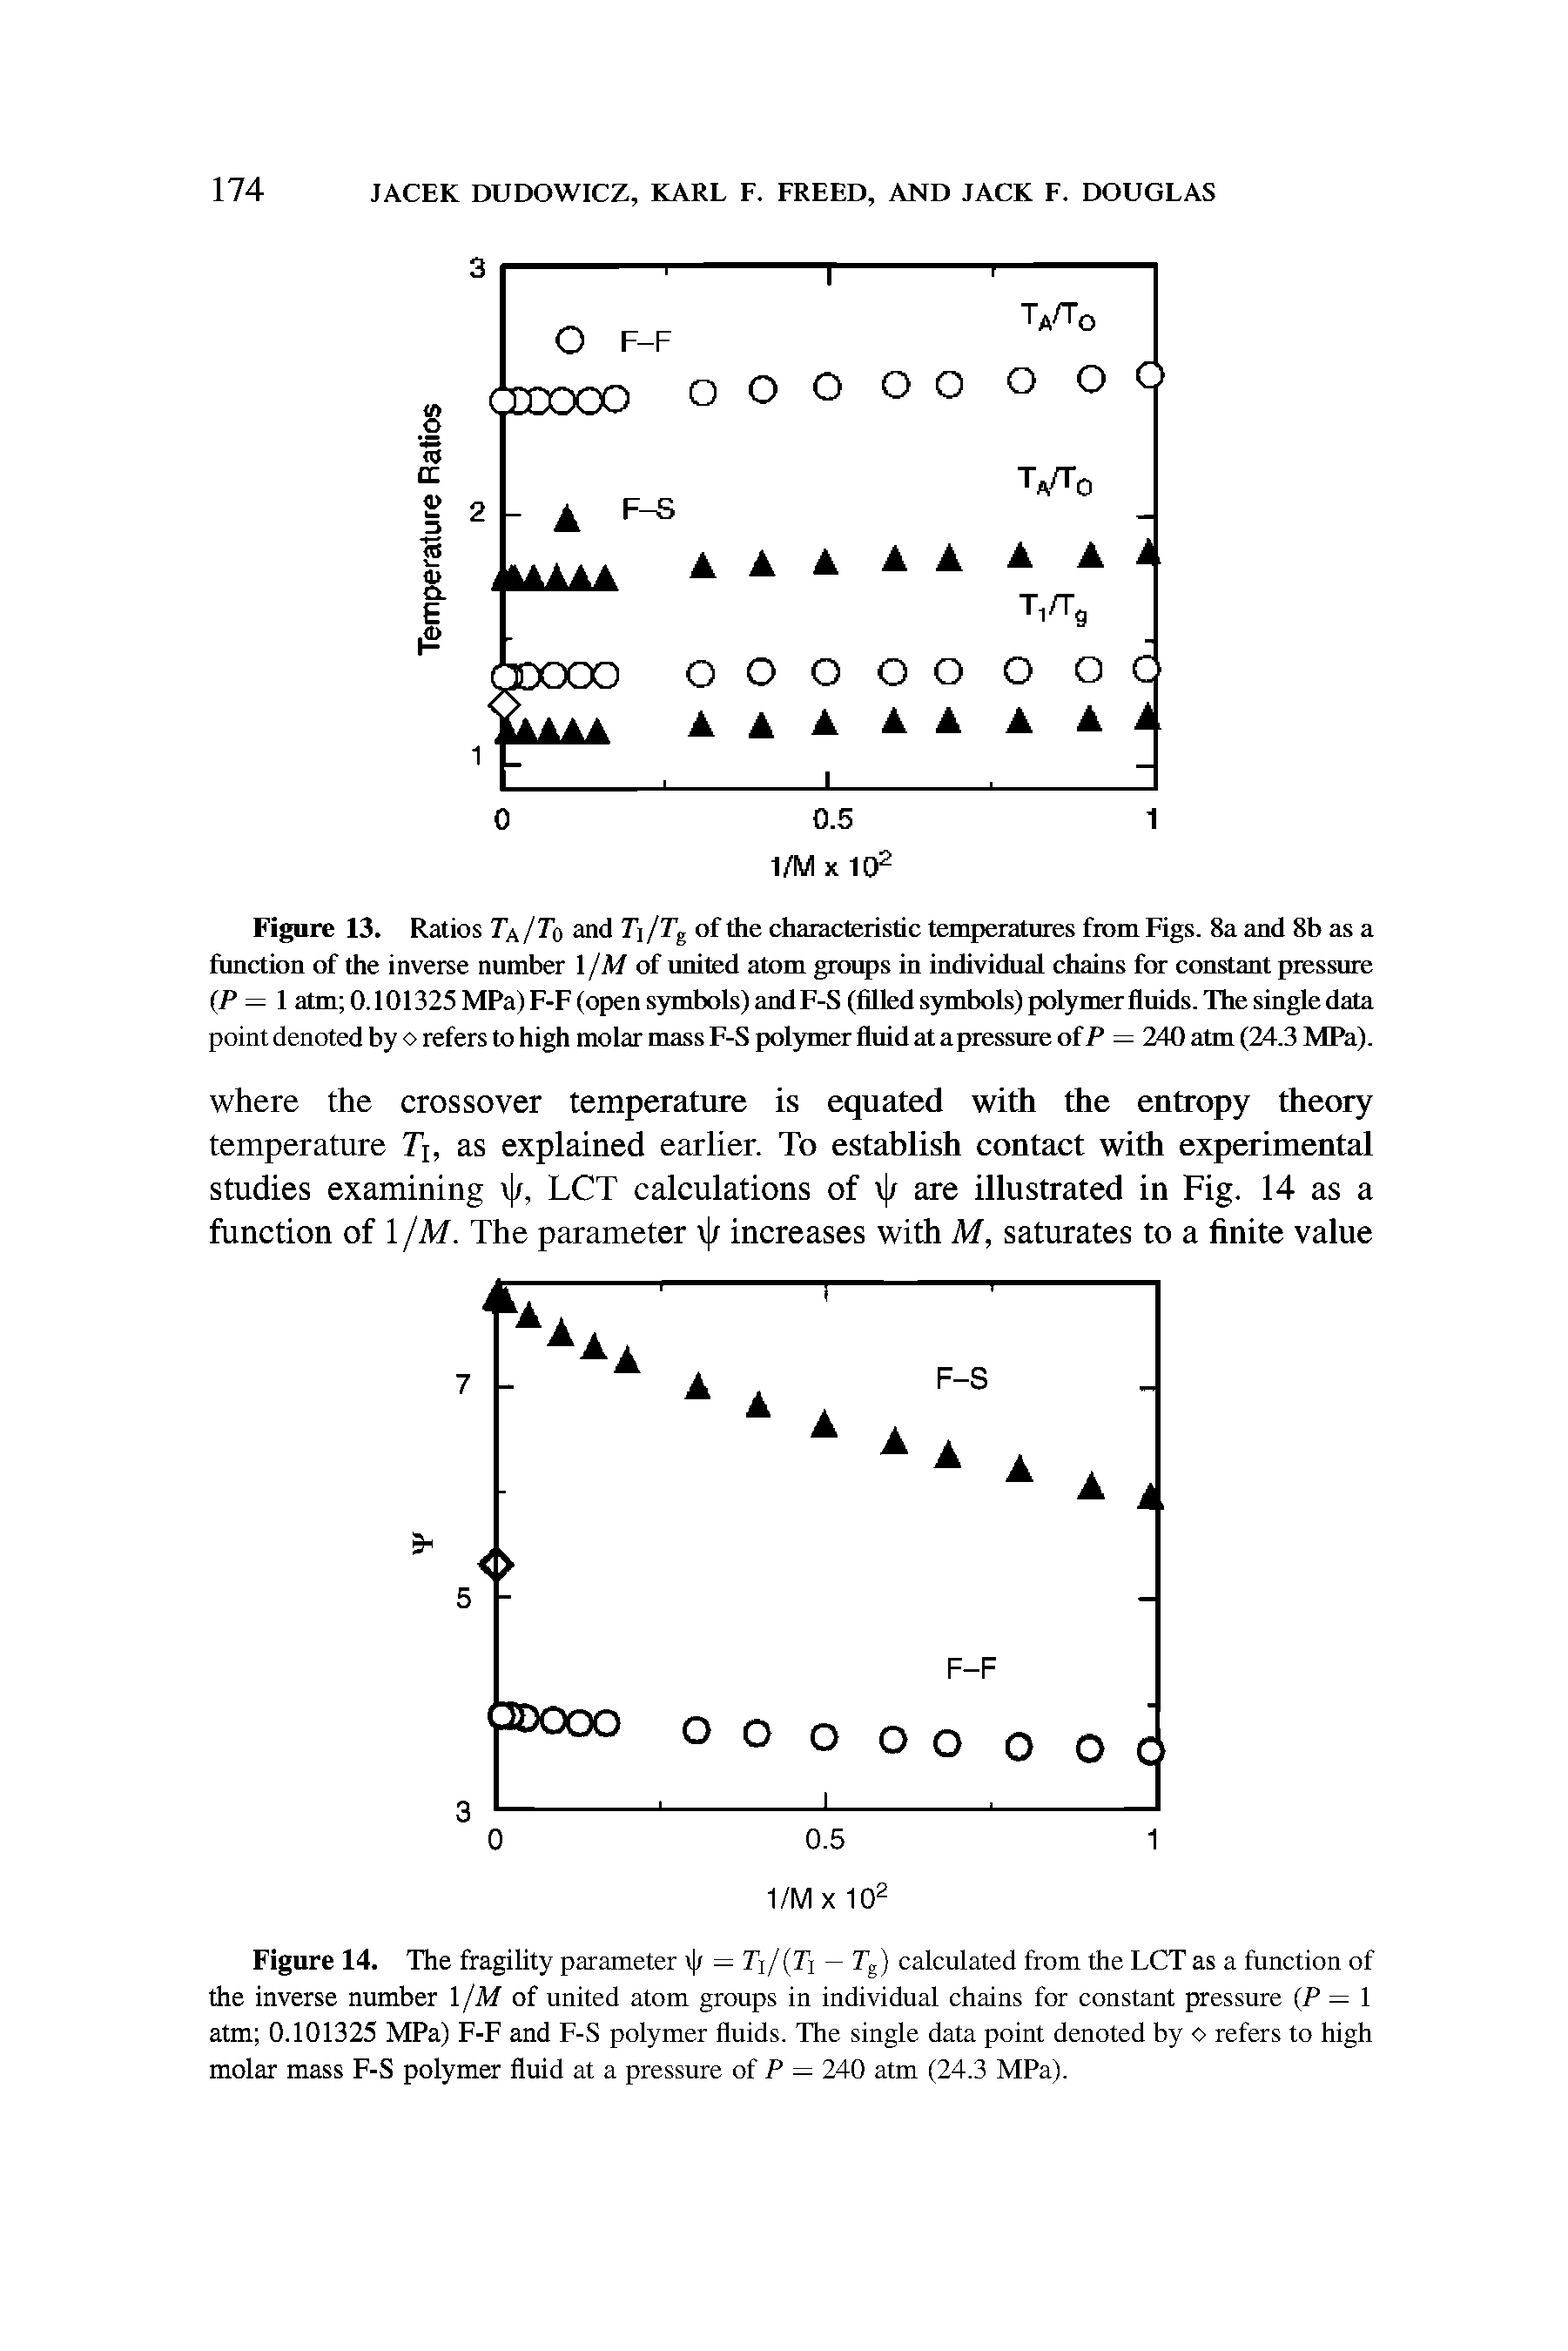 Figure 13. Ratios T/ /To and Ti/Tg of the characteristic temperatures from Figs. 8a and 8b as a function of the inverse number l/M oi united atom groups in individual chains for constant pressure (P = 1 atm 0.101325 MPa)F-F (open symbols) and F-S (filled symbols) polymer fluids. The single data point denoted by refers to high molar mass F-S polymer fluid at a pressure of P = 240 atm (24.3 MPa).